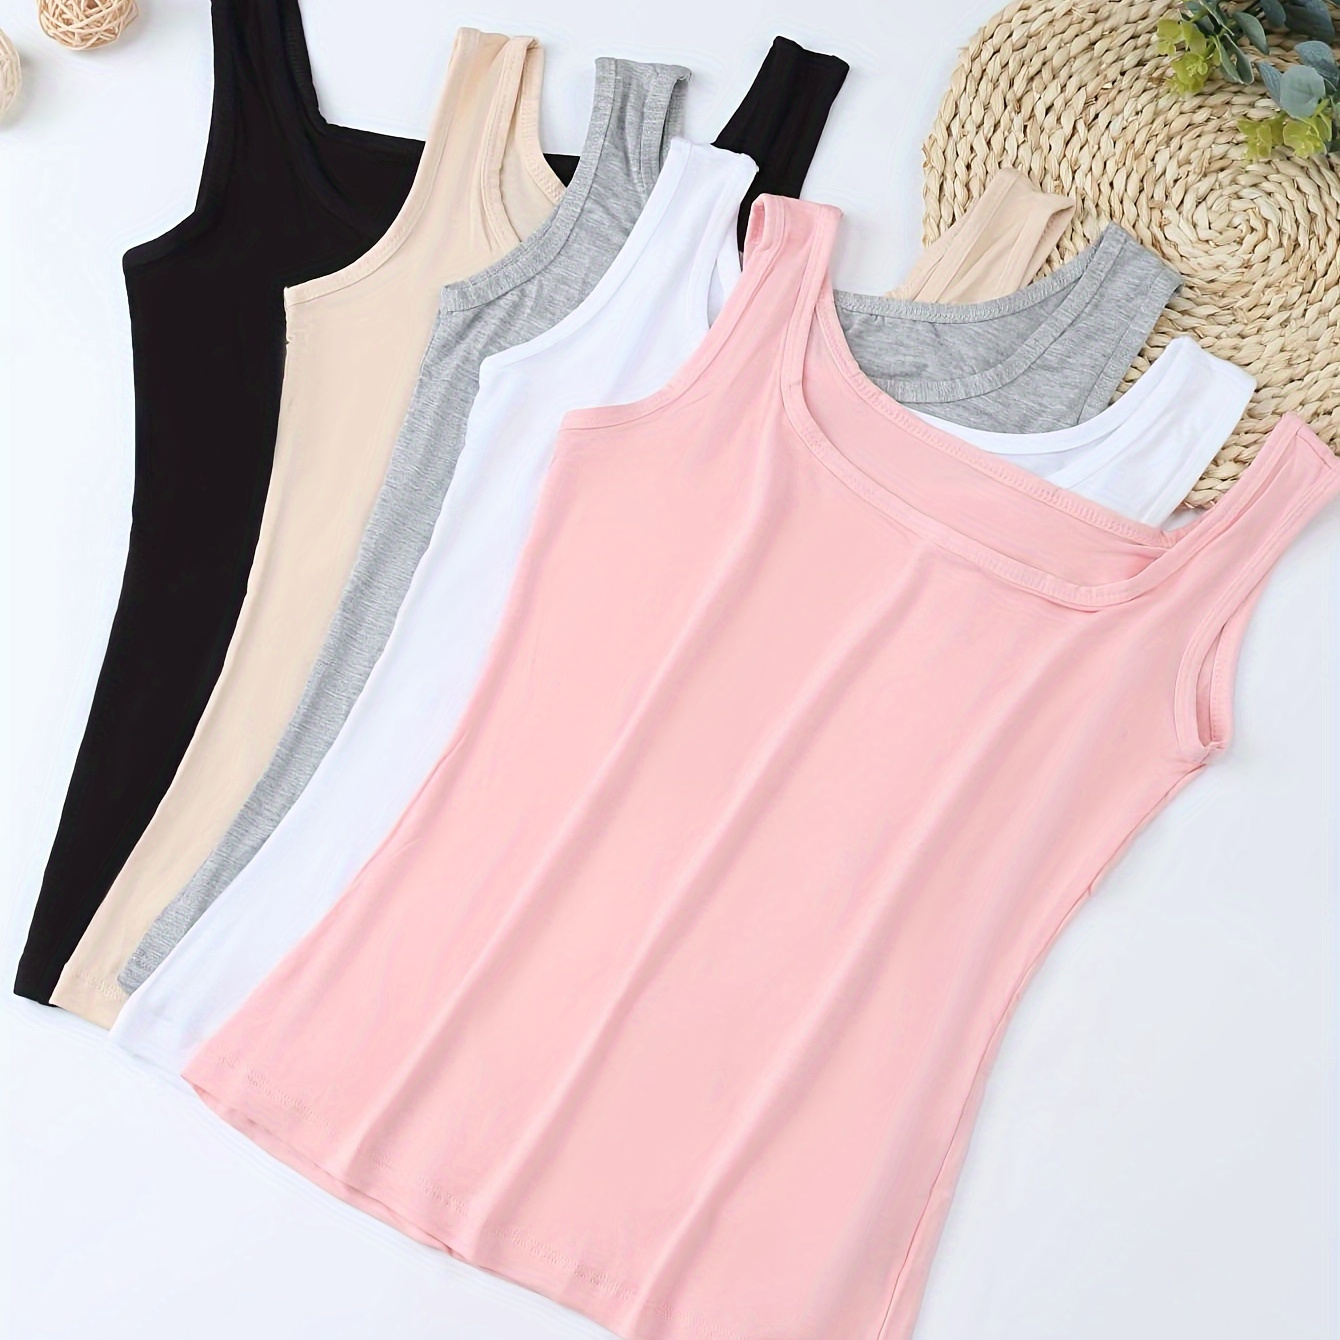 

5-pack Women's Sleeveless Knit Tank Tops, Soft & Stretchy Basic Solid Layering Vests, Casual All-match Style, Multi-color Set